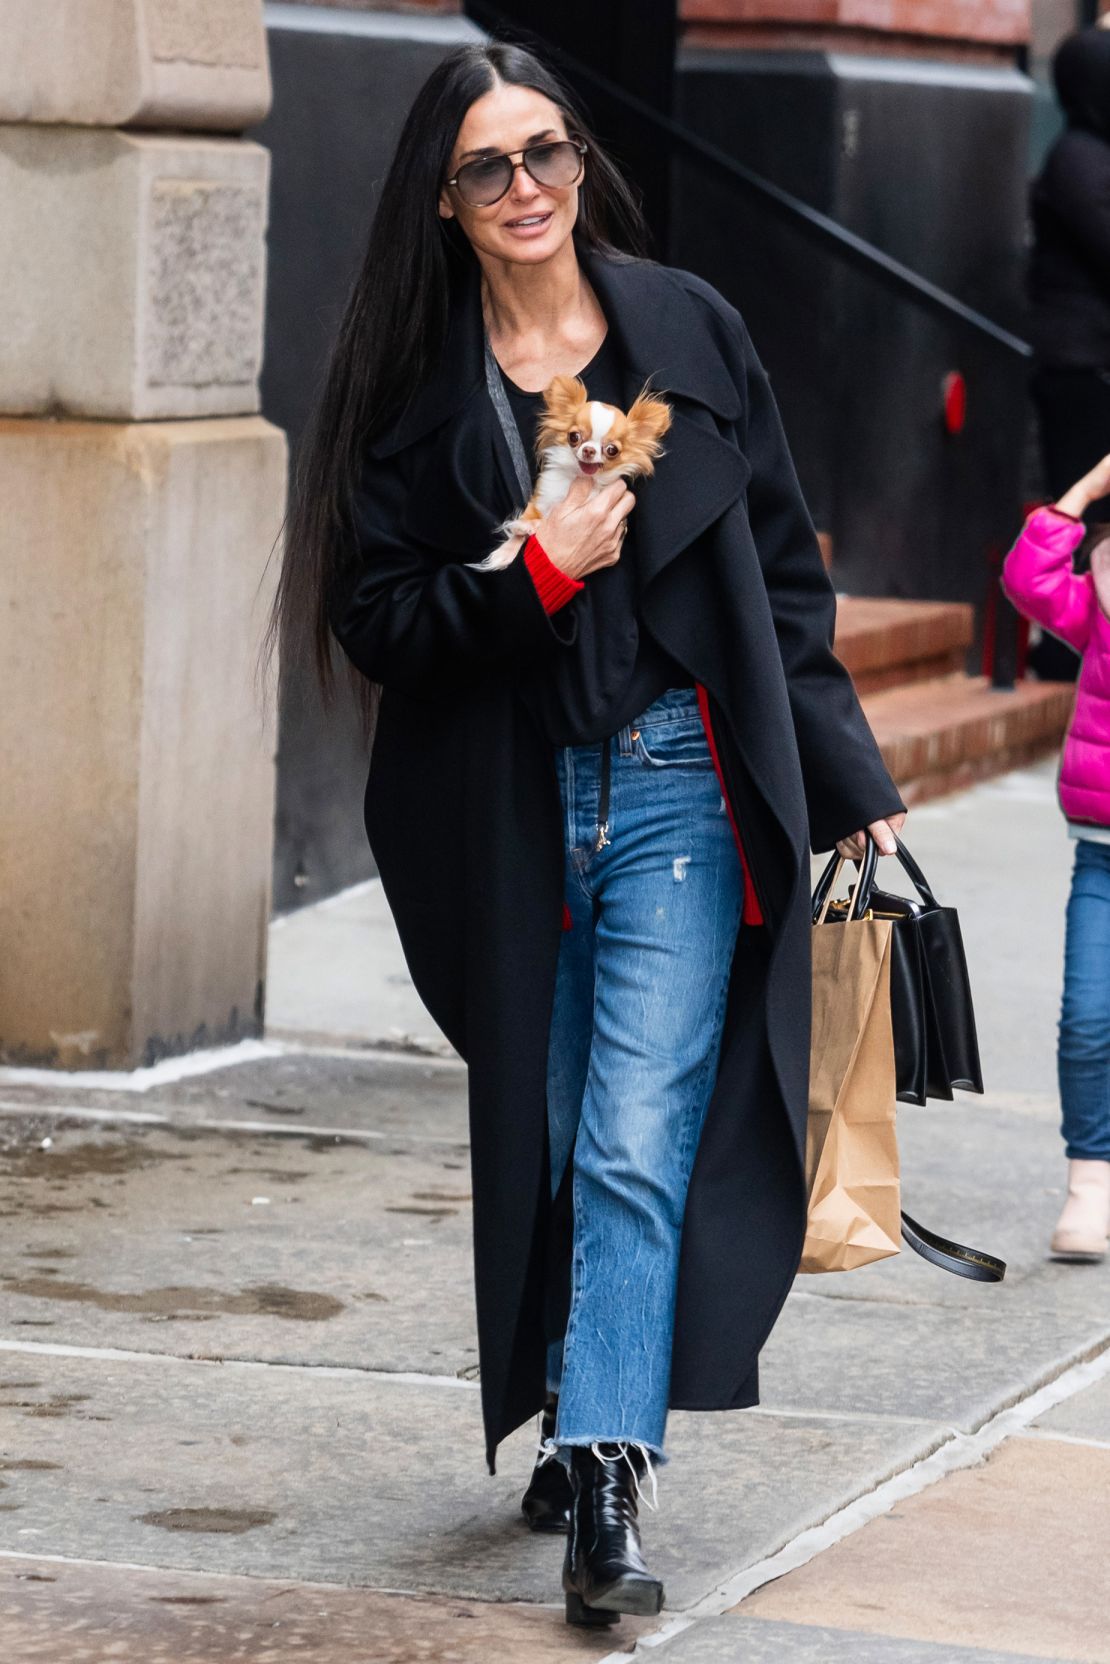 On Monday, Moore was spotted again with her dog, Pilaf, this time in Tribeca.